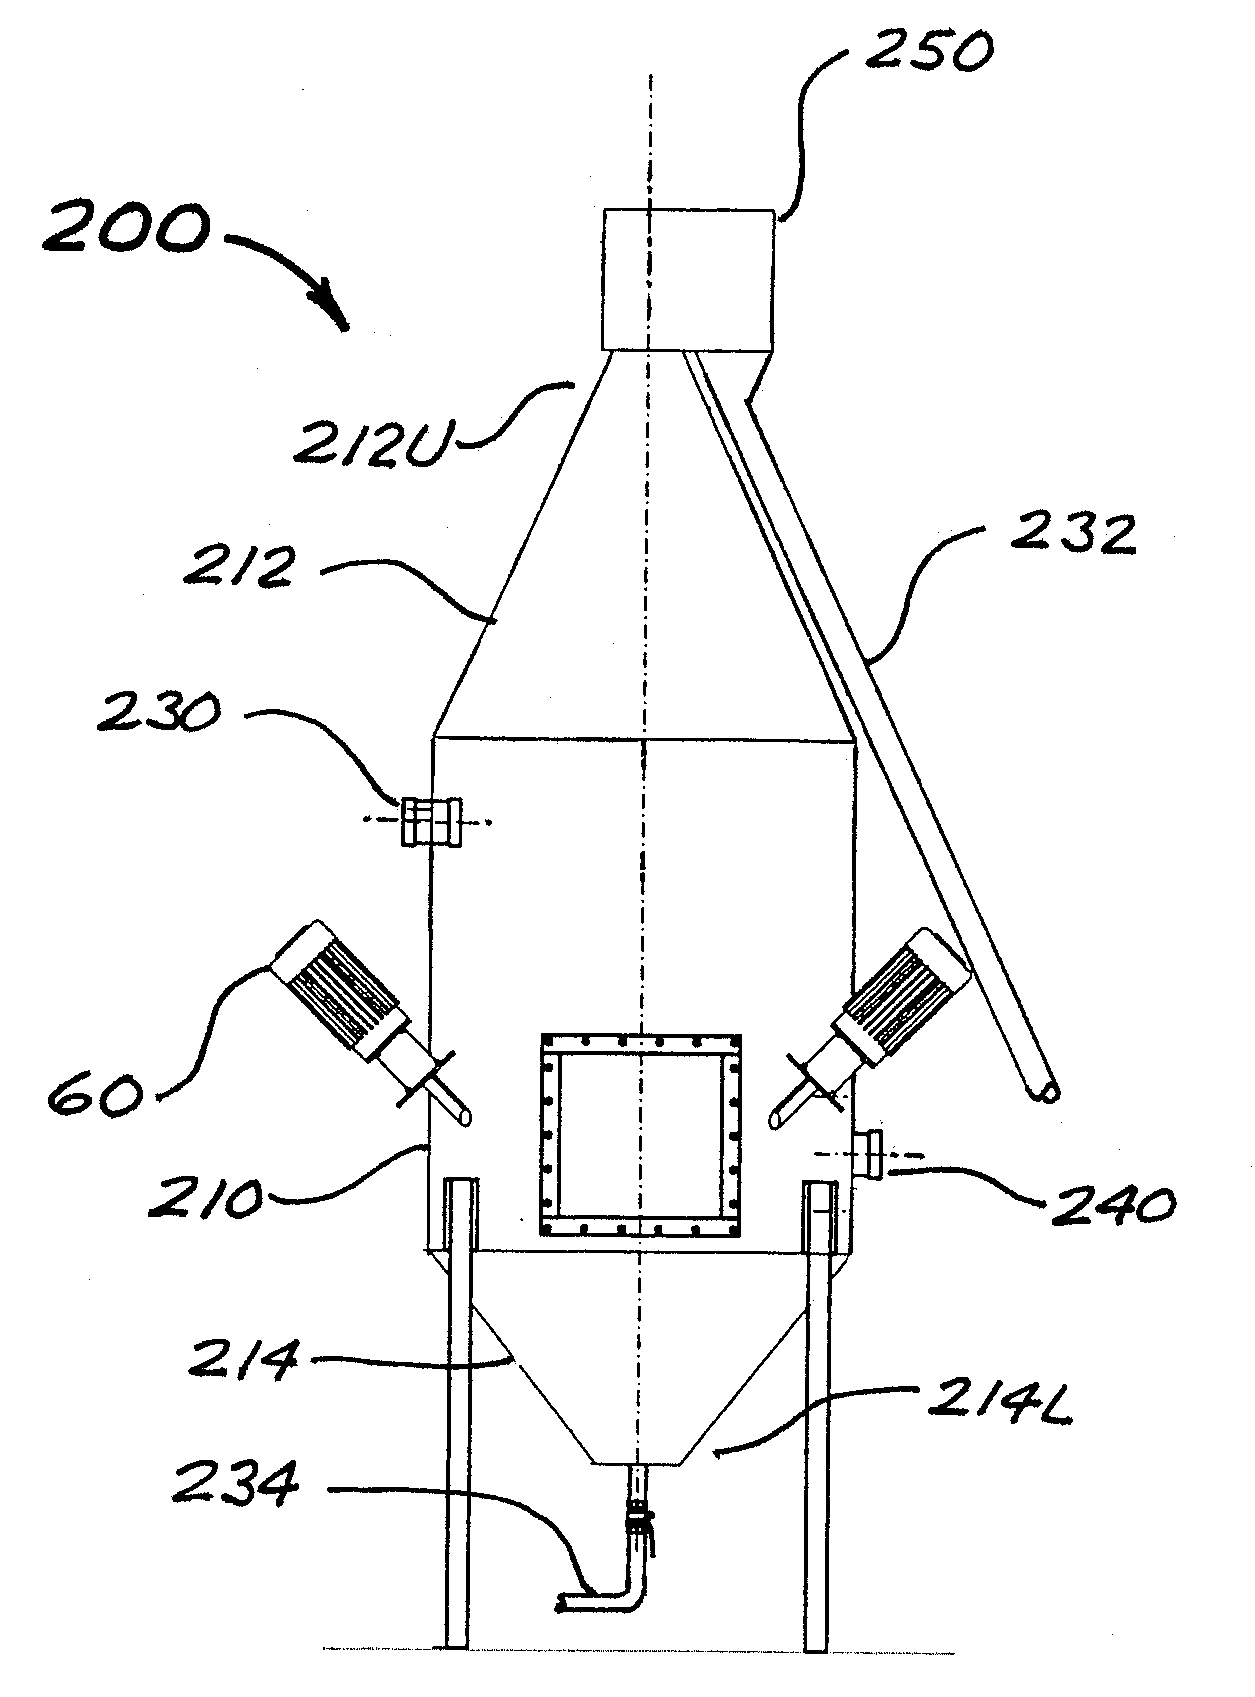 Process and apparatus for separating hydrocarbons from produced water